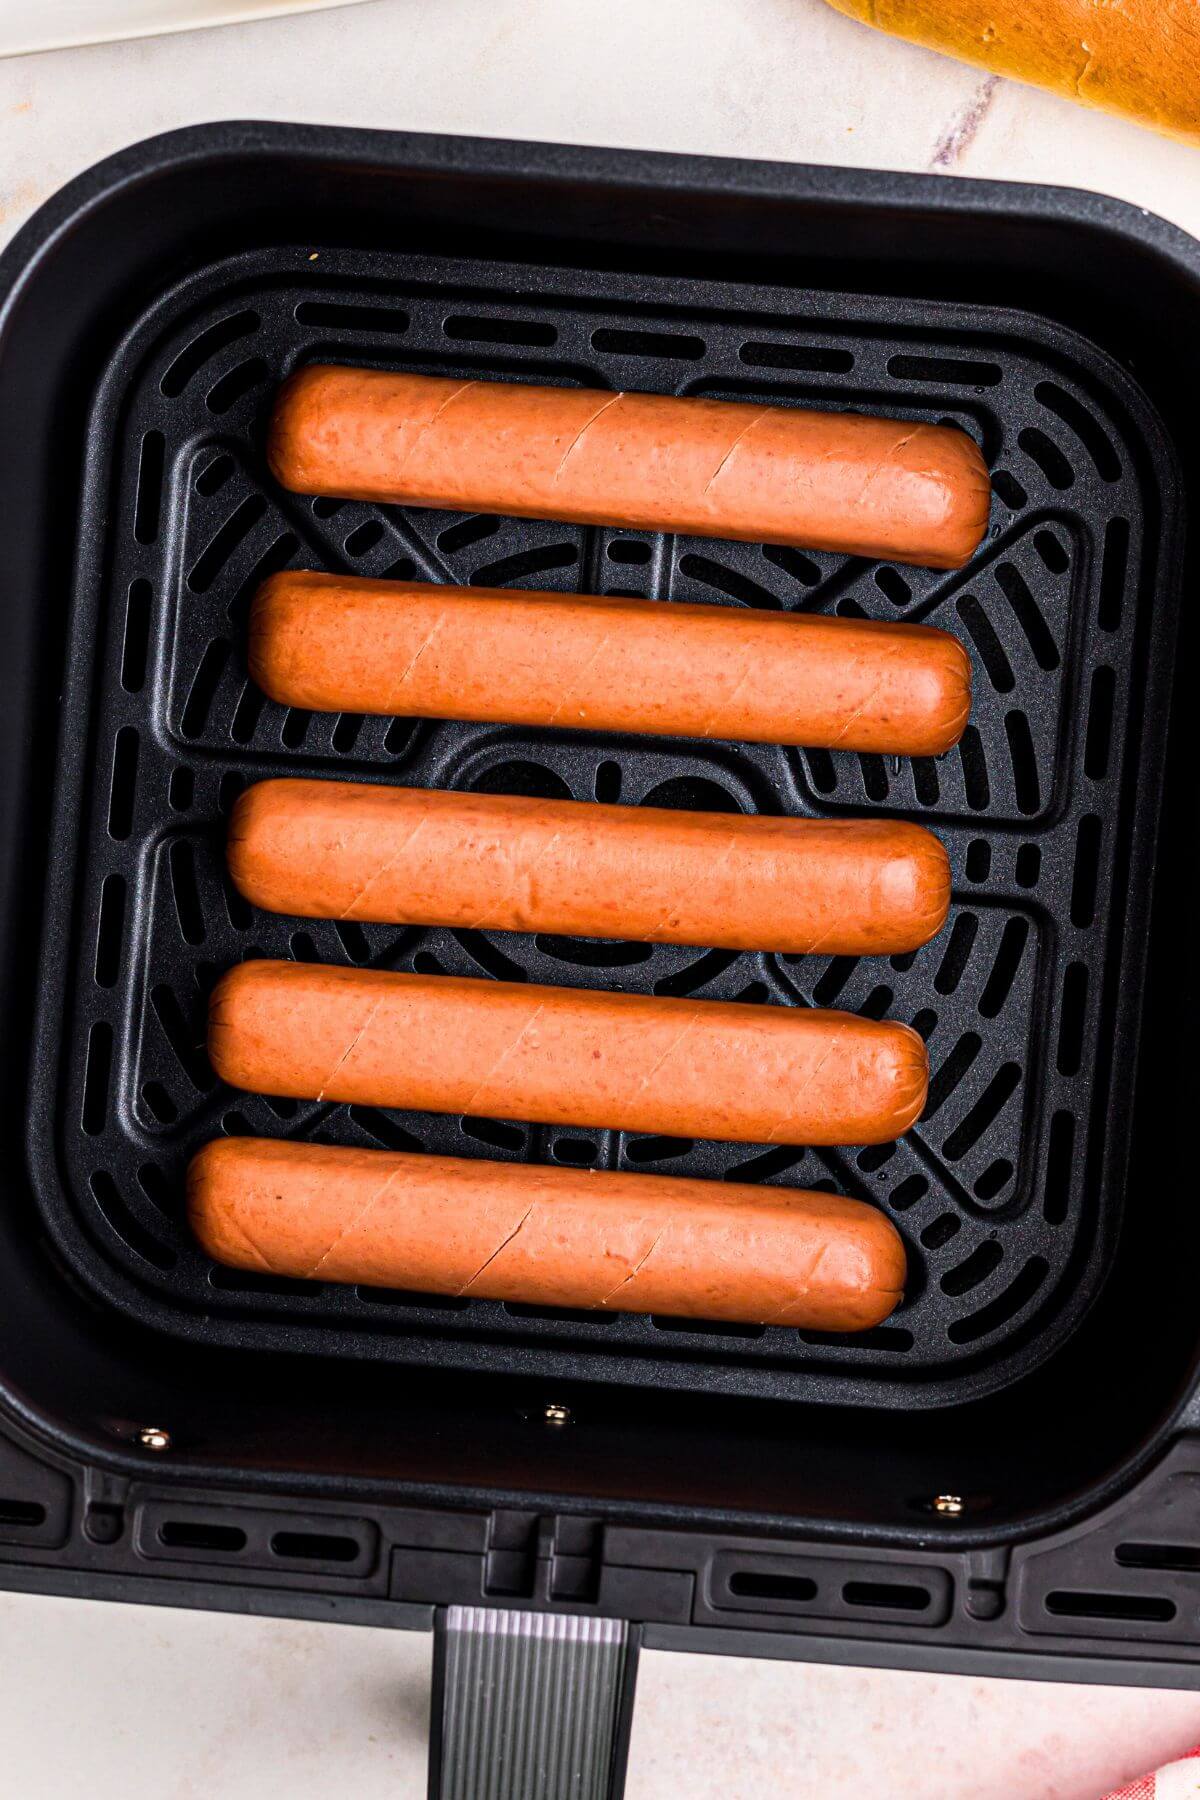 Uncooked hot dogs in the air fryer basket. 